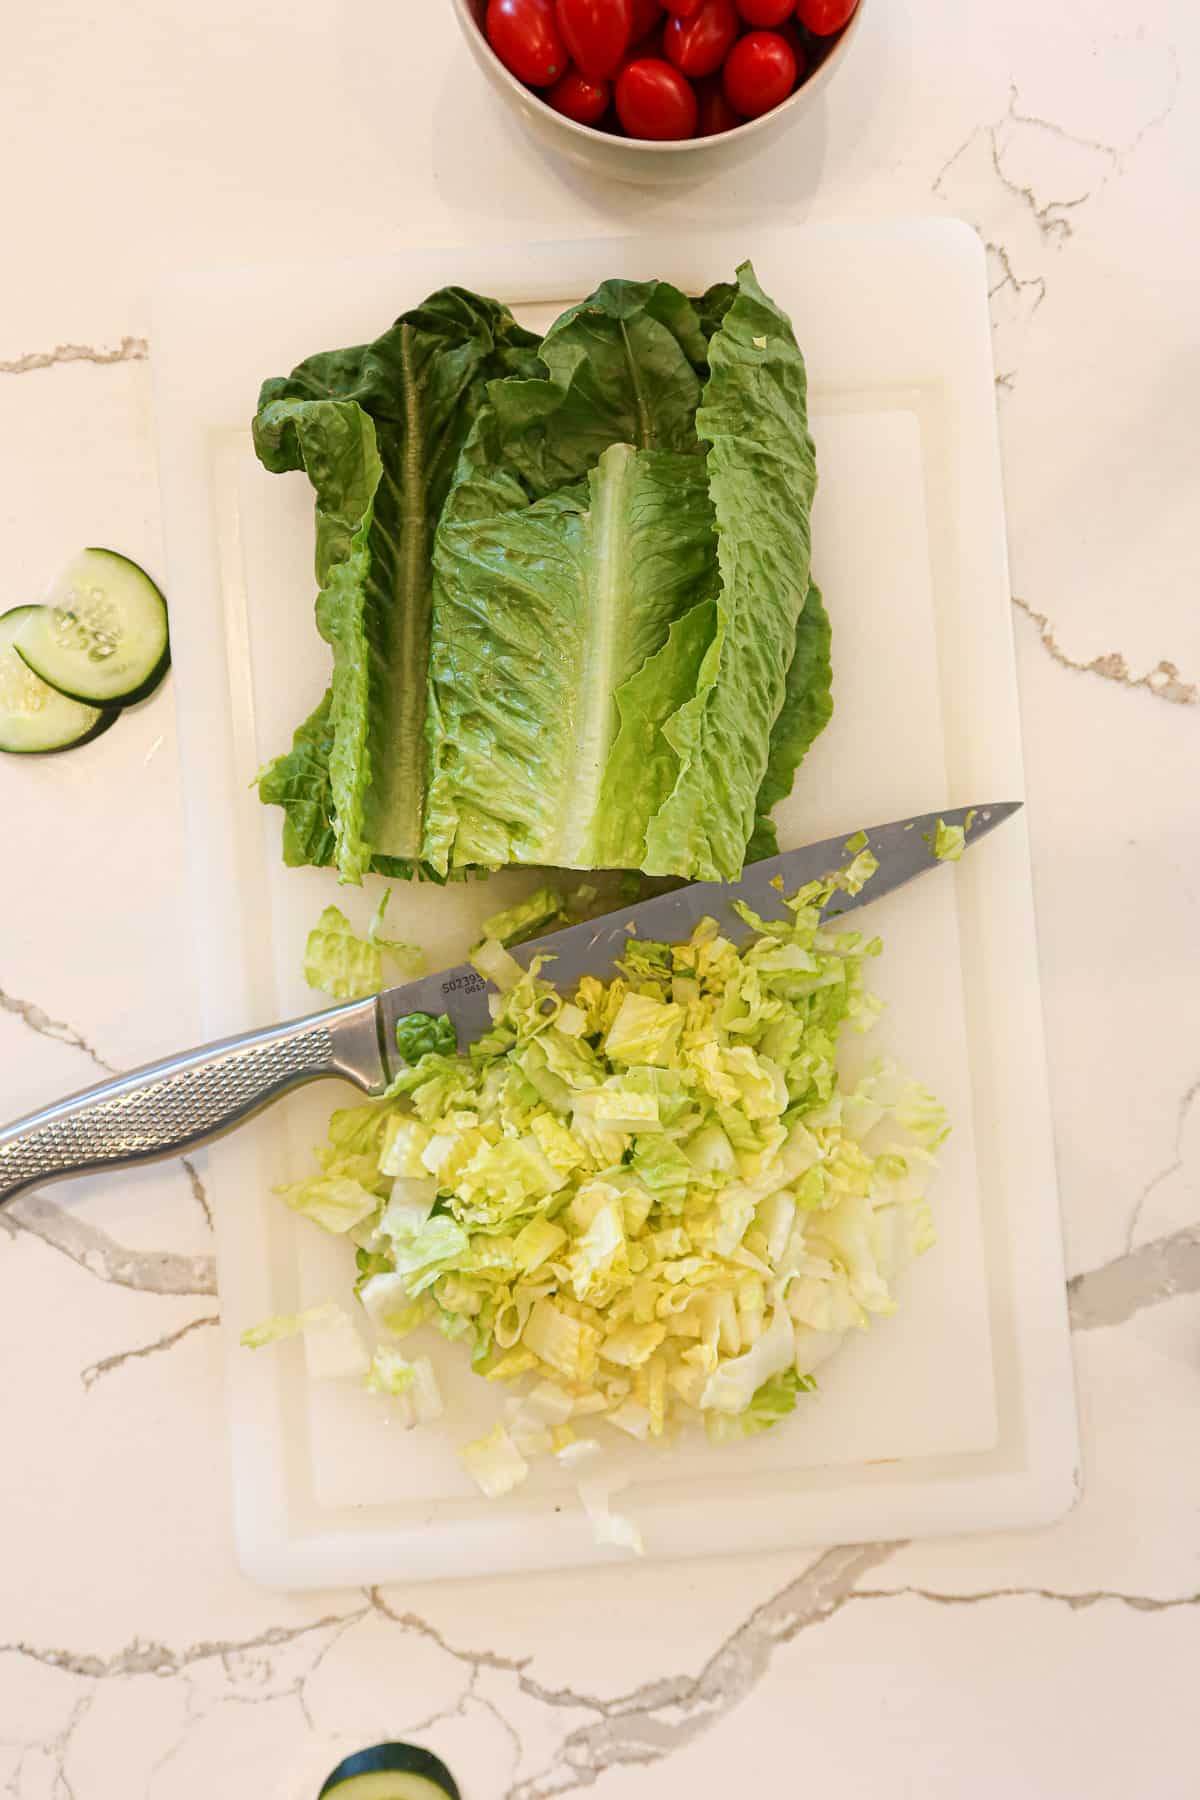 Chopping romaine lettuce on a white cutting board.